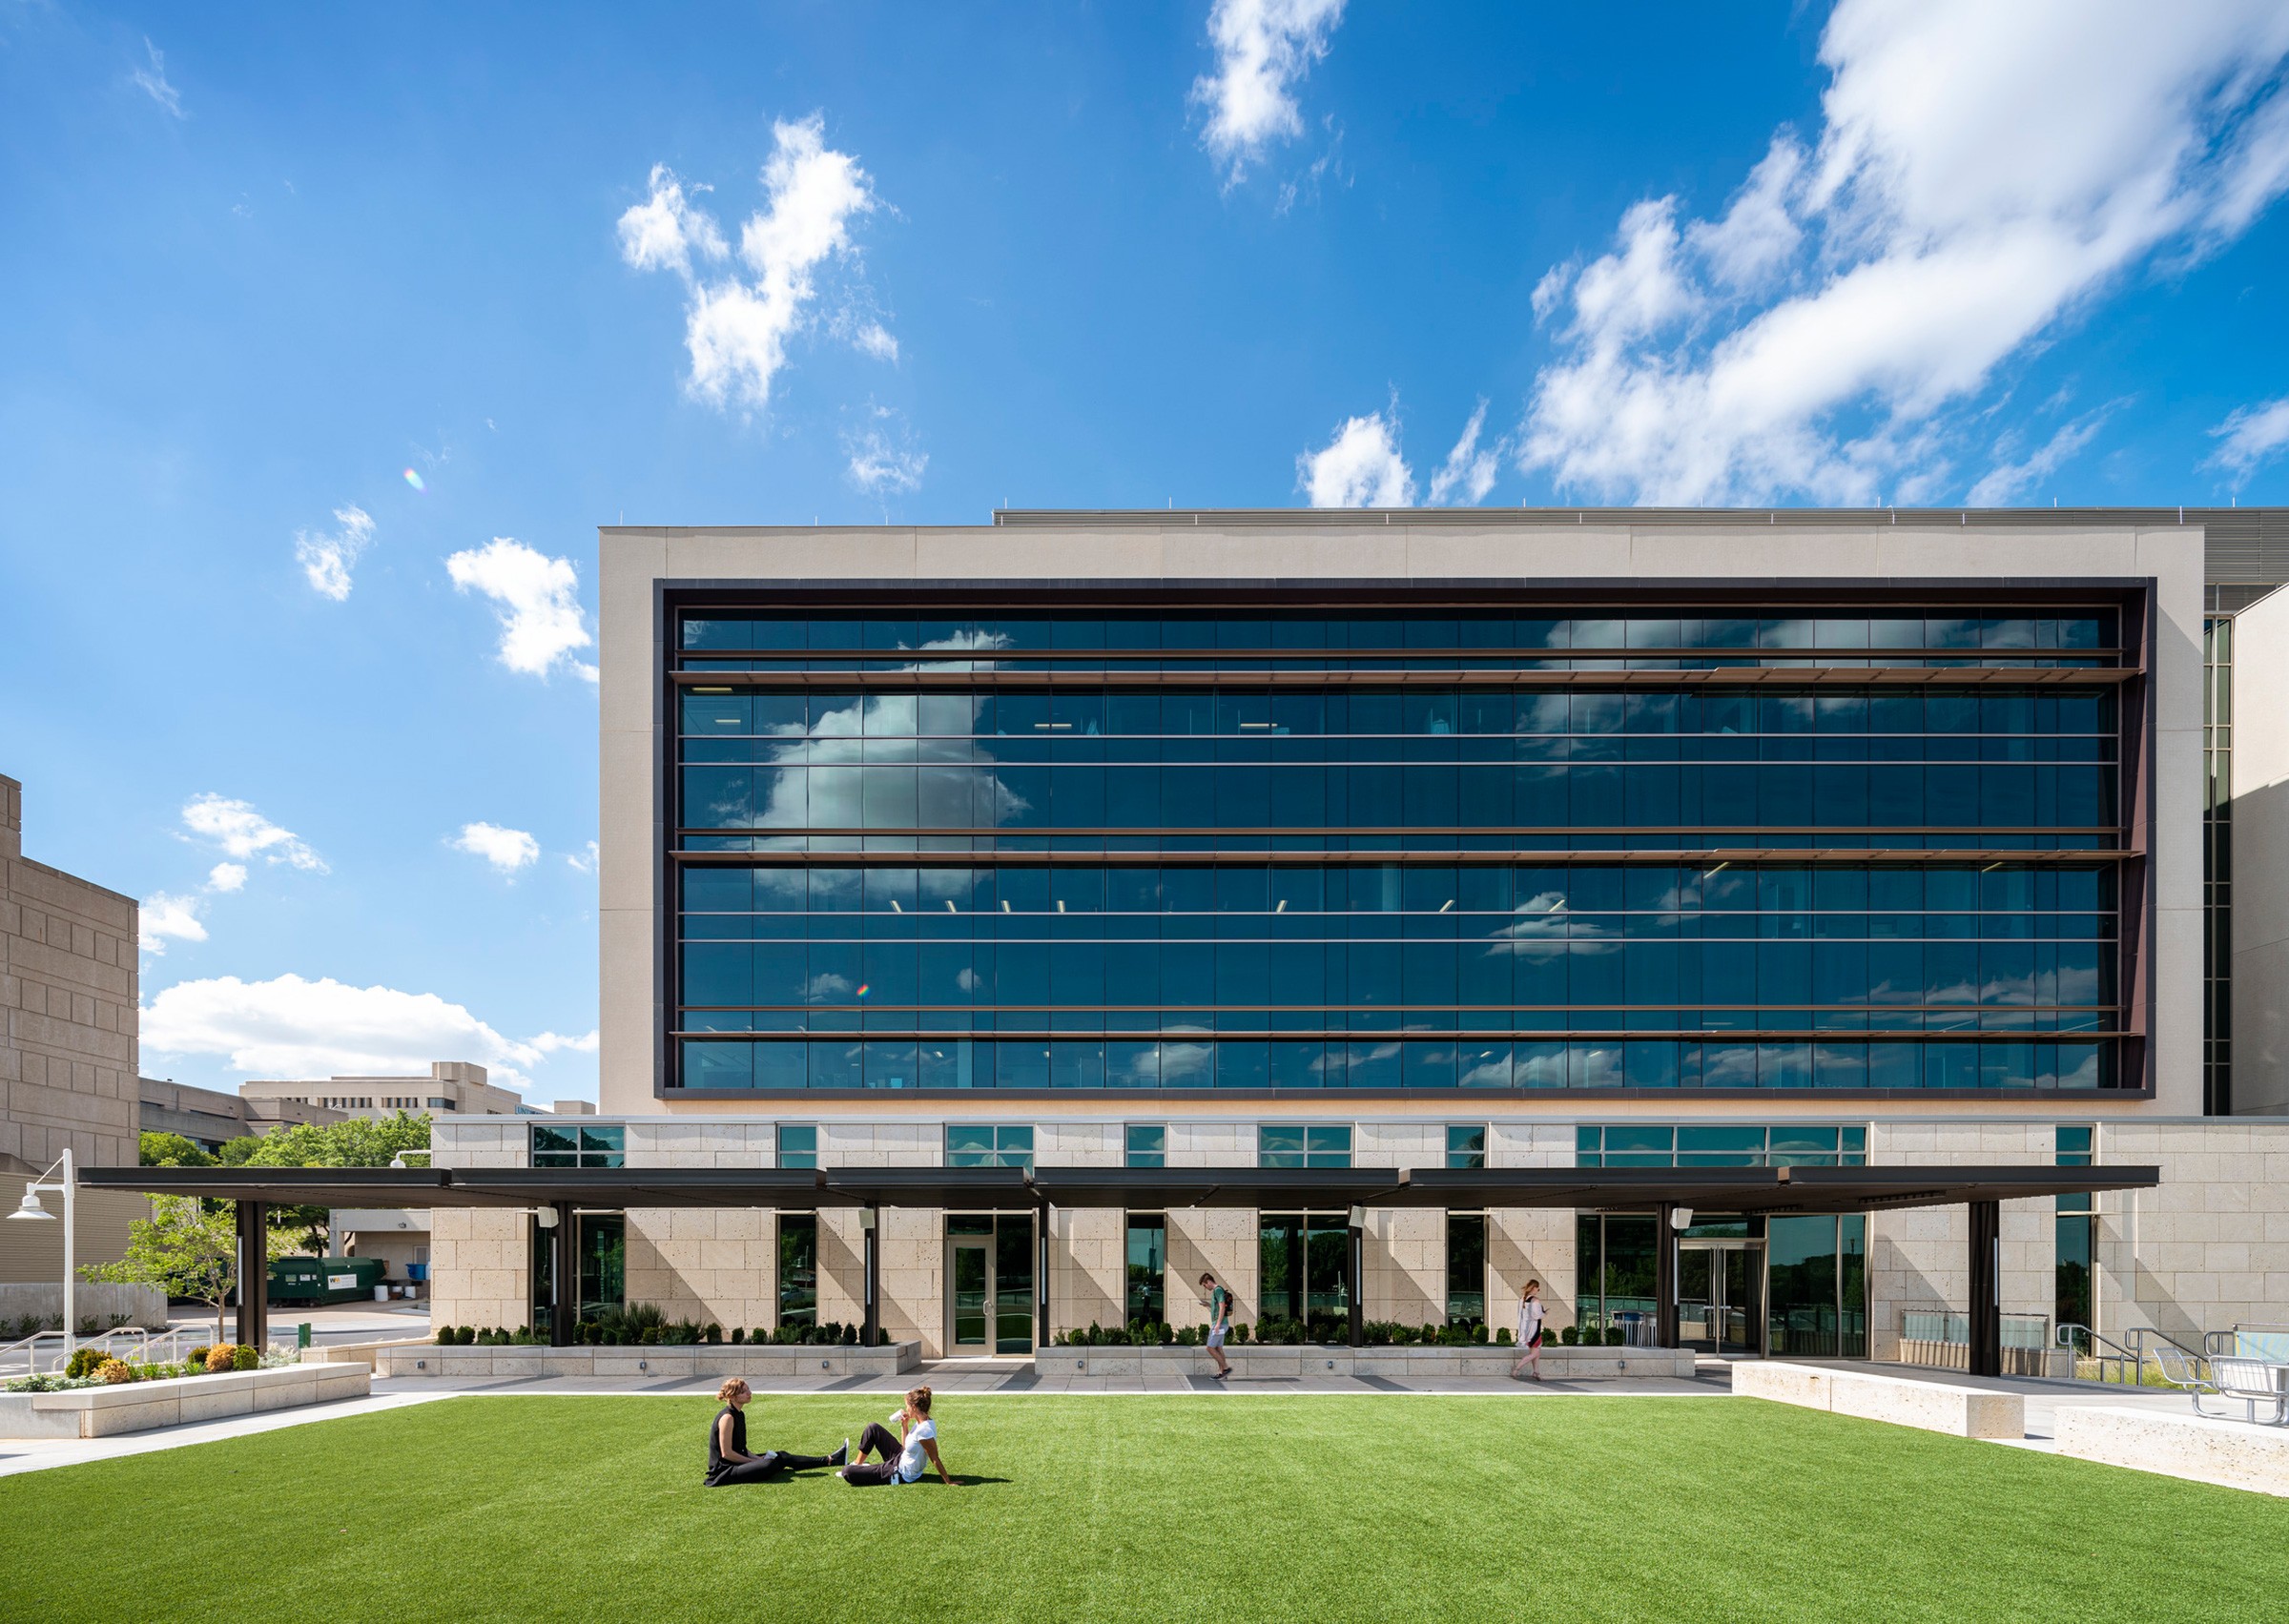 Exterior daytime elevation image with expansive lawn on the foreground of the University of North Texas Interdisciplinary Research and Education building